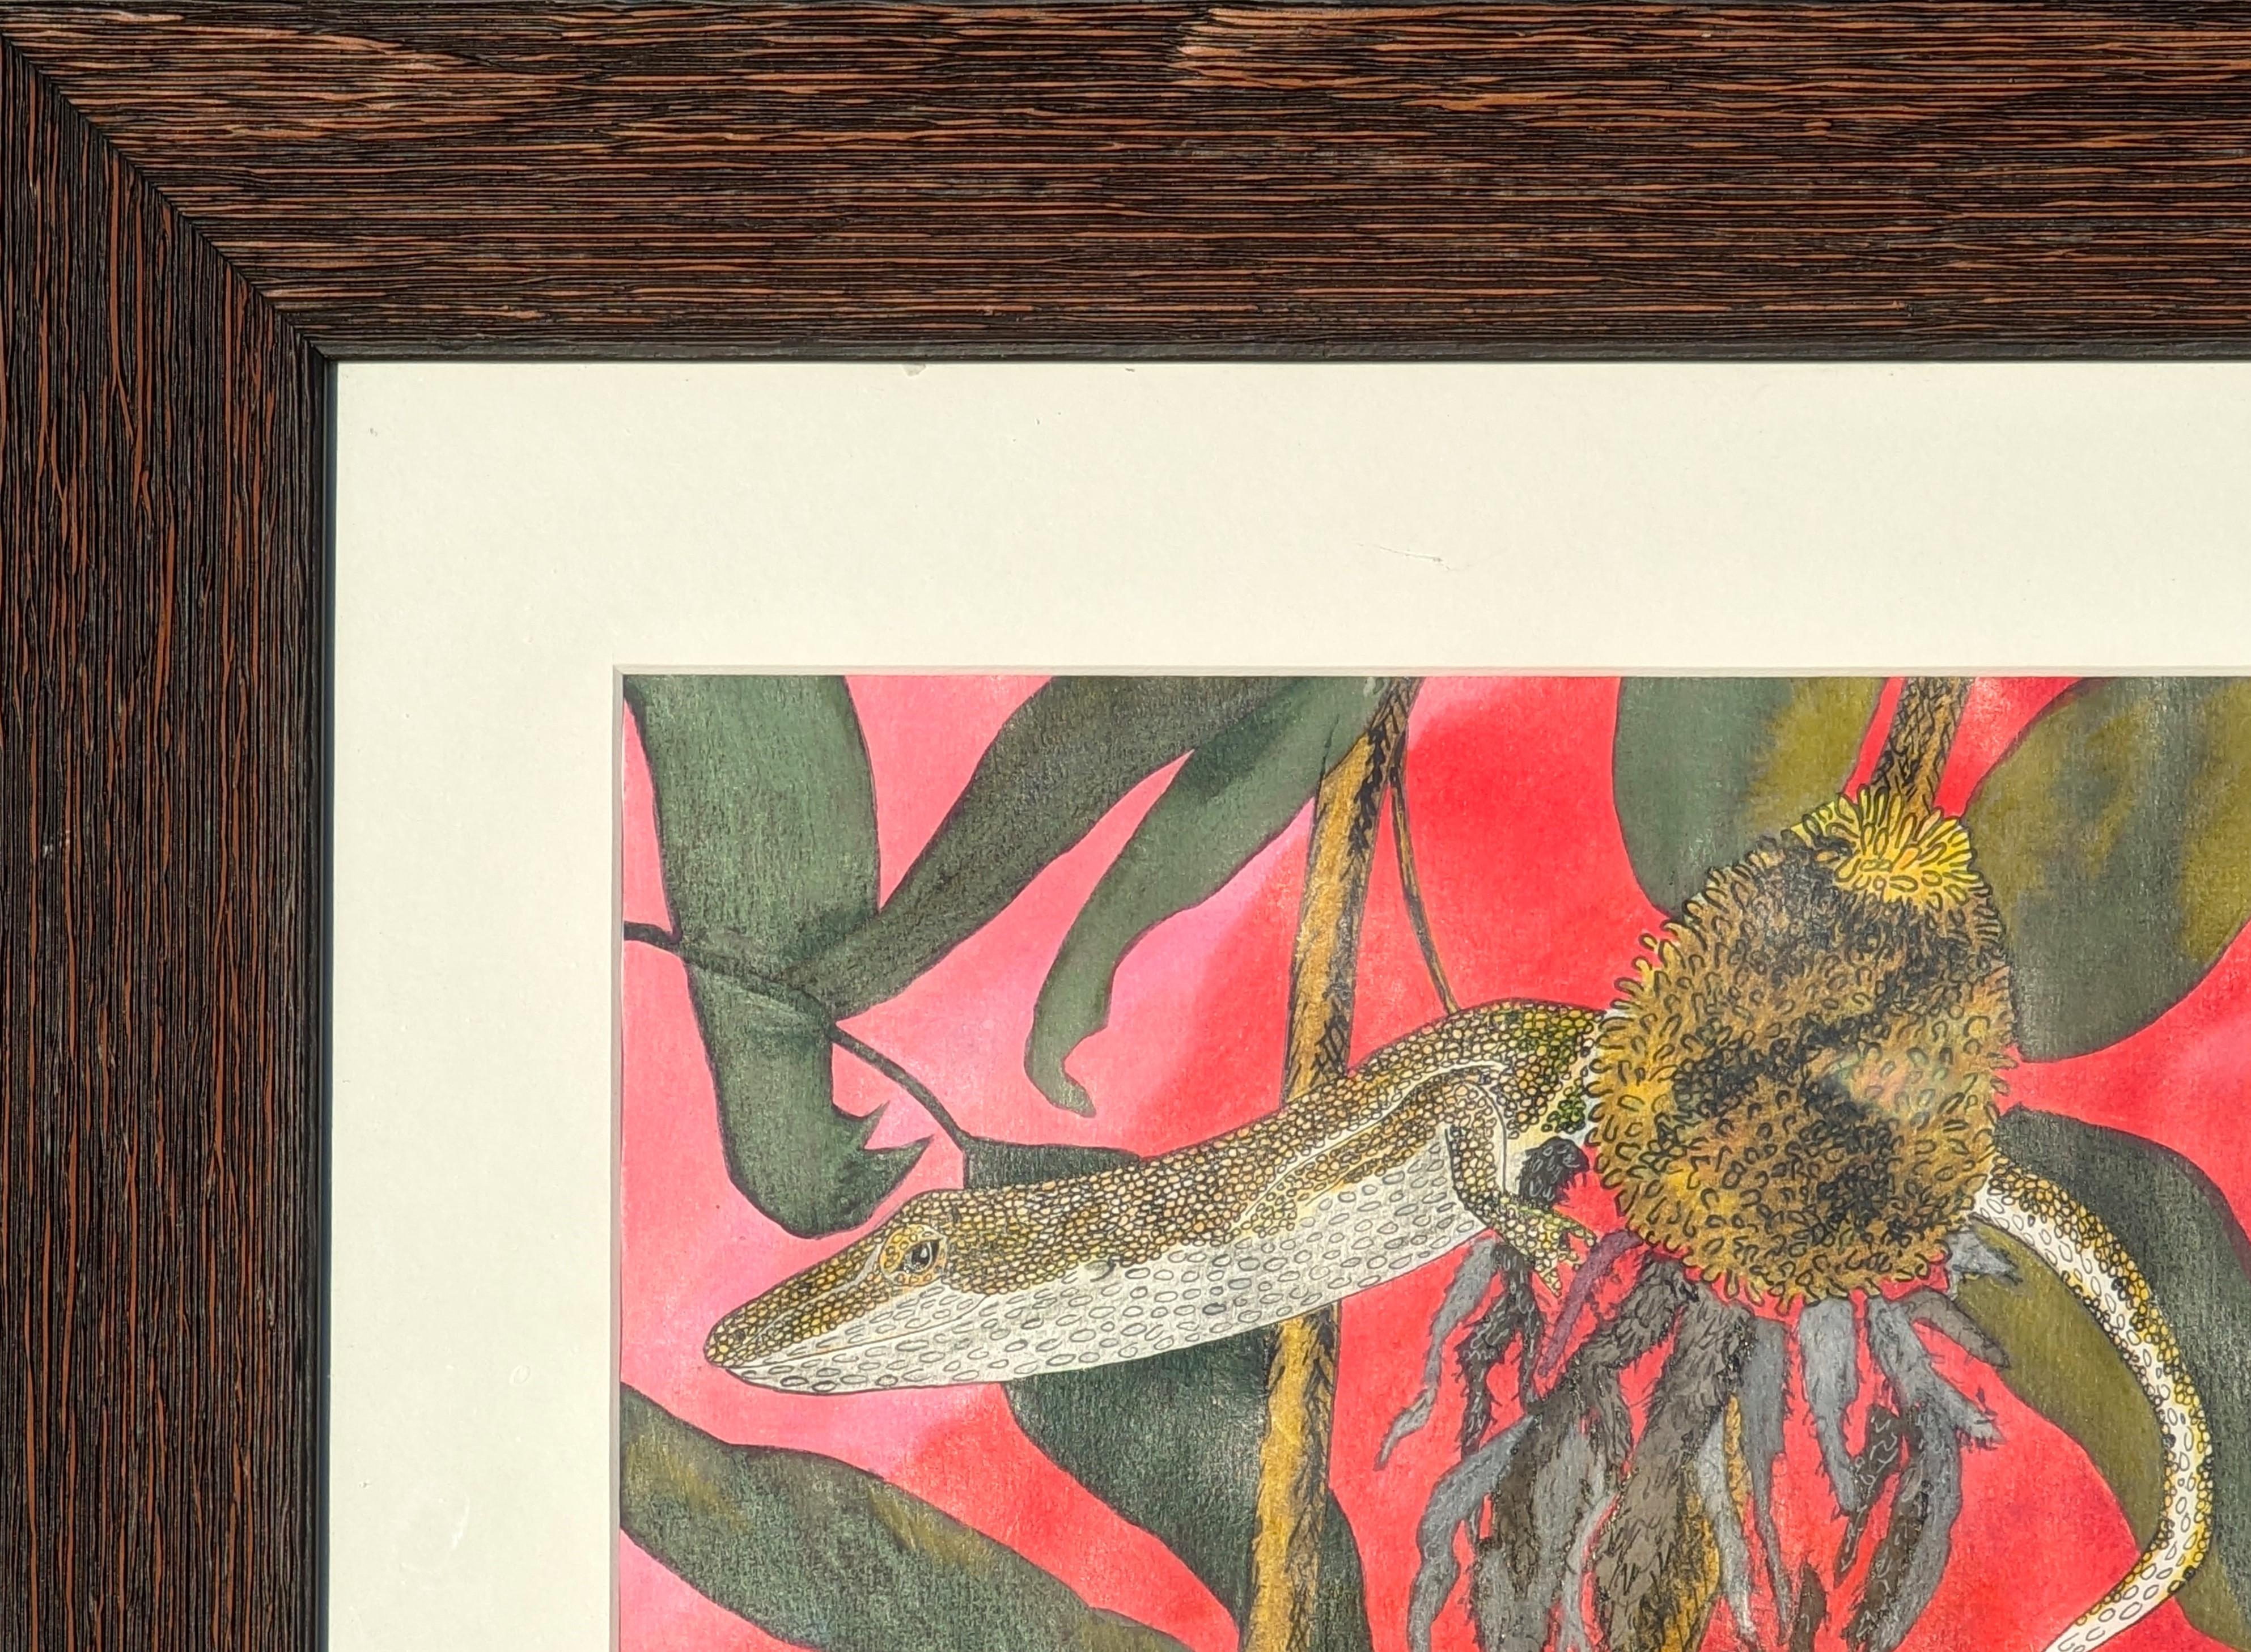 Red and green abstract drawing by Houston, TX artist Marguerite Baldwin. The drawing depicts a lizard on a plant against a red background. Signed and dated by the artist at the bottom left corner. The piece is framed and matted in a natural raised